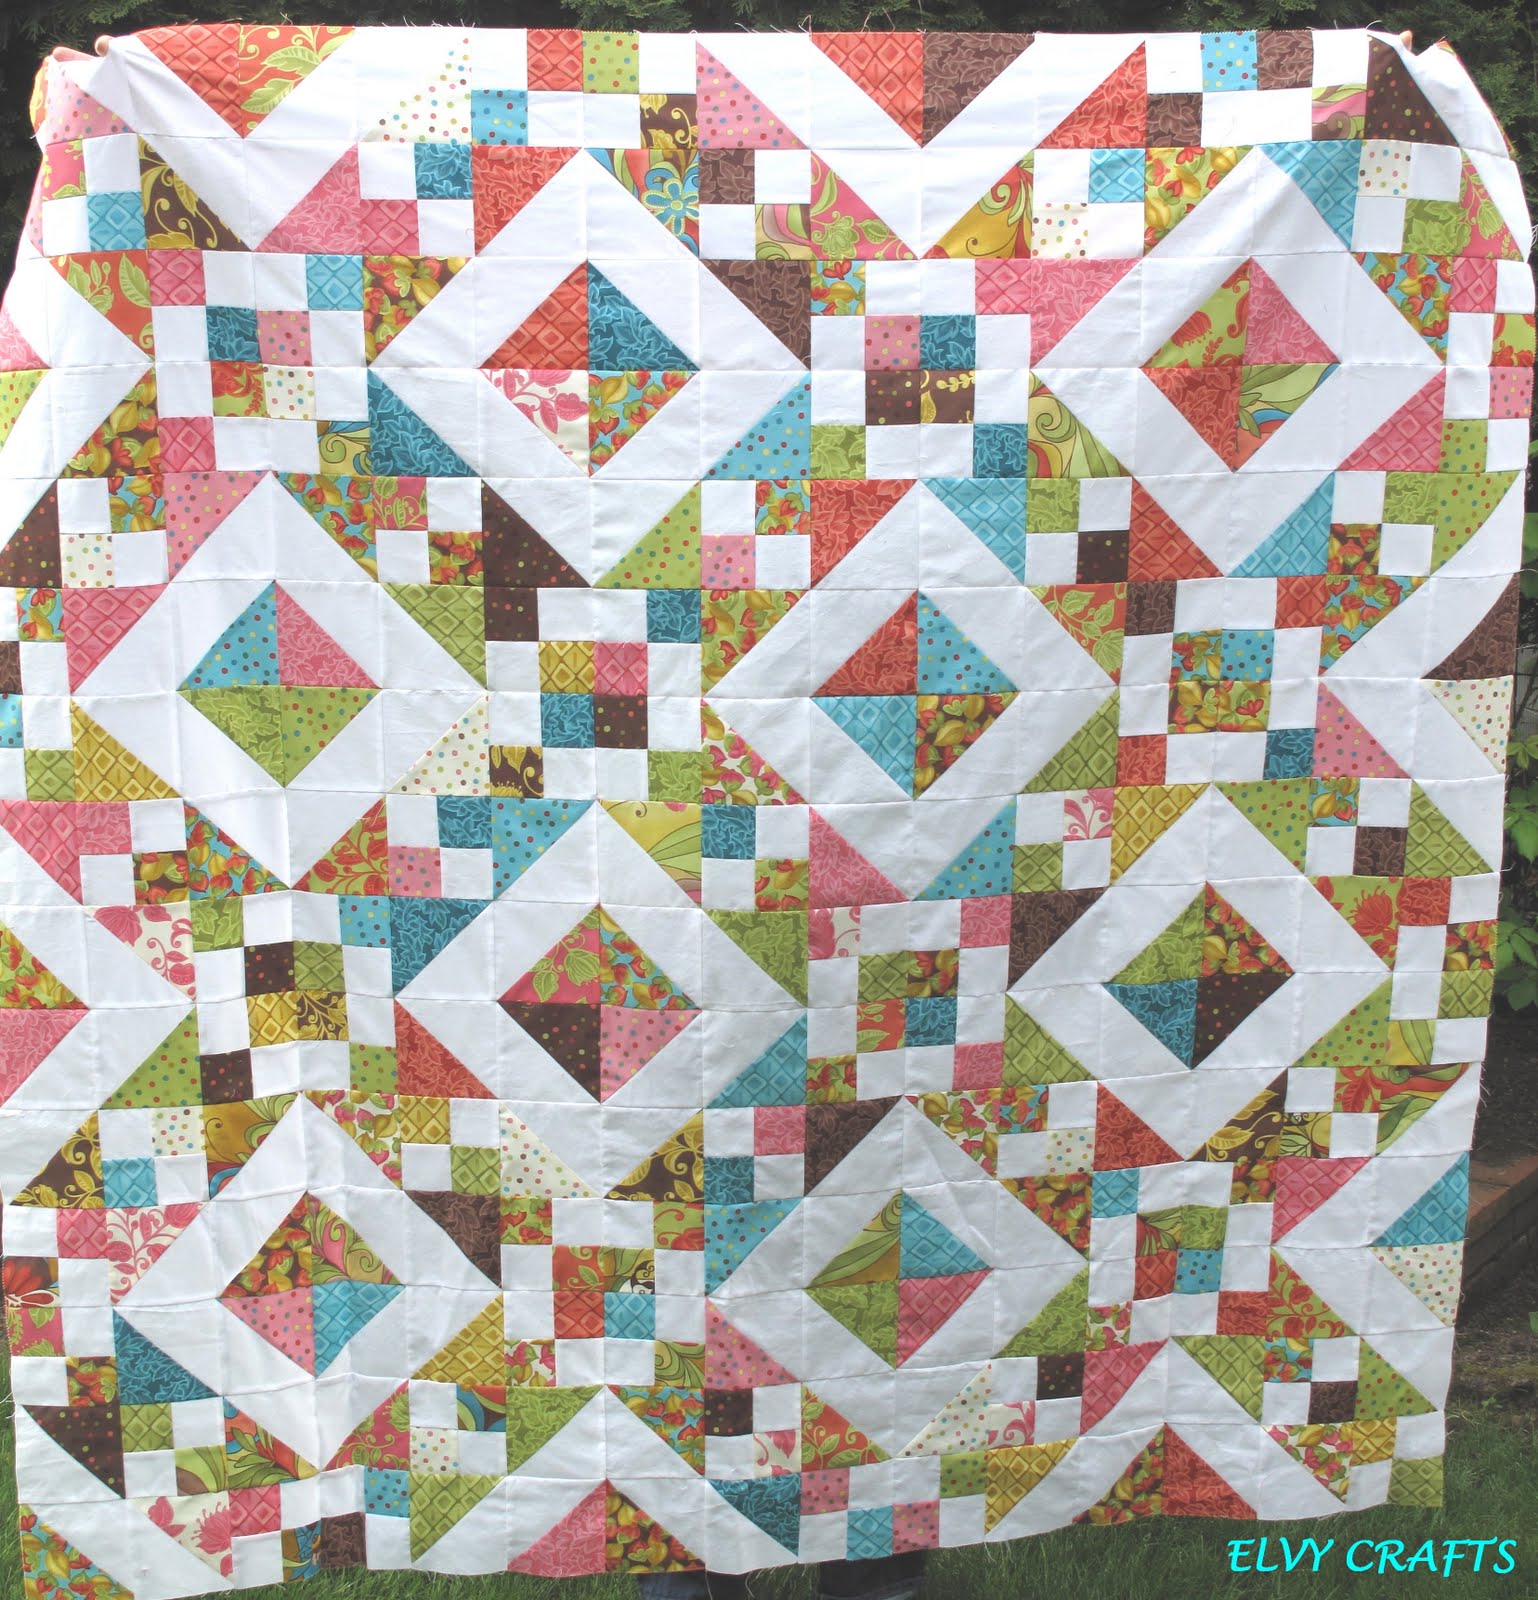 Elvy Crafts: Charm Pack Quilt Along